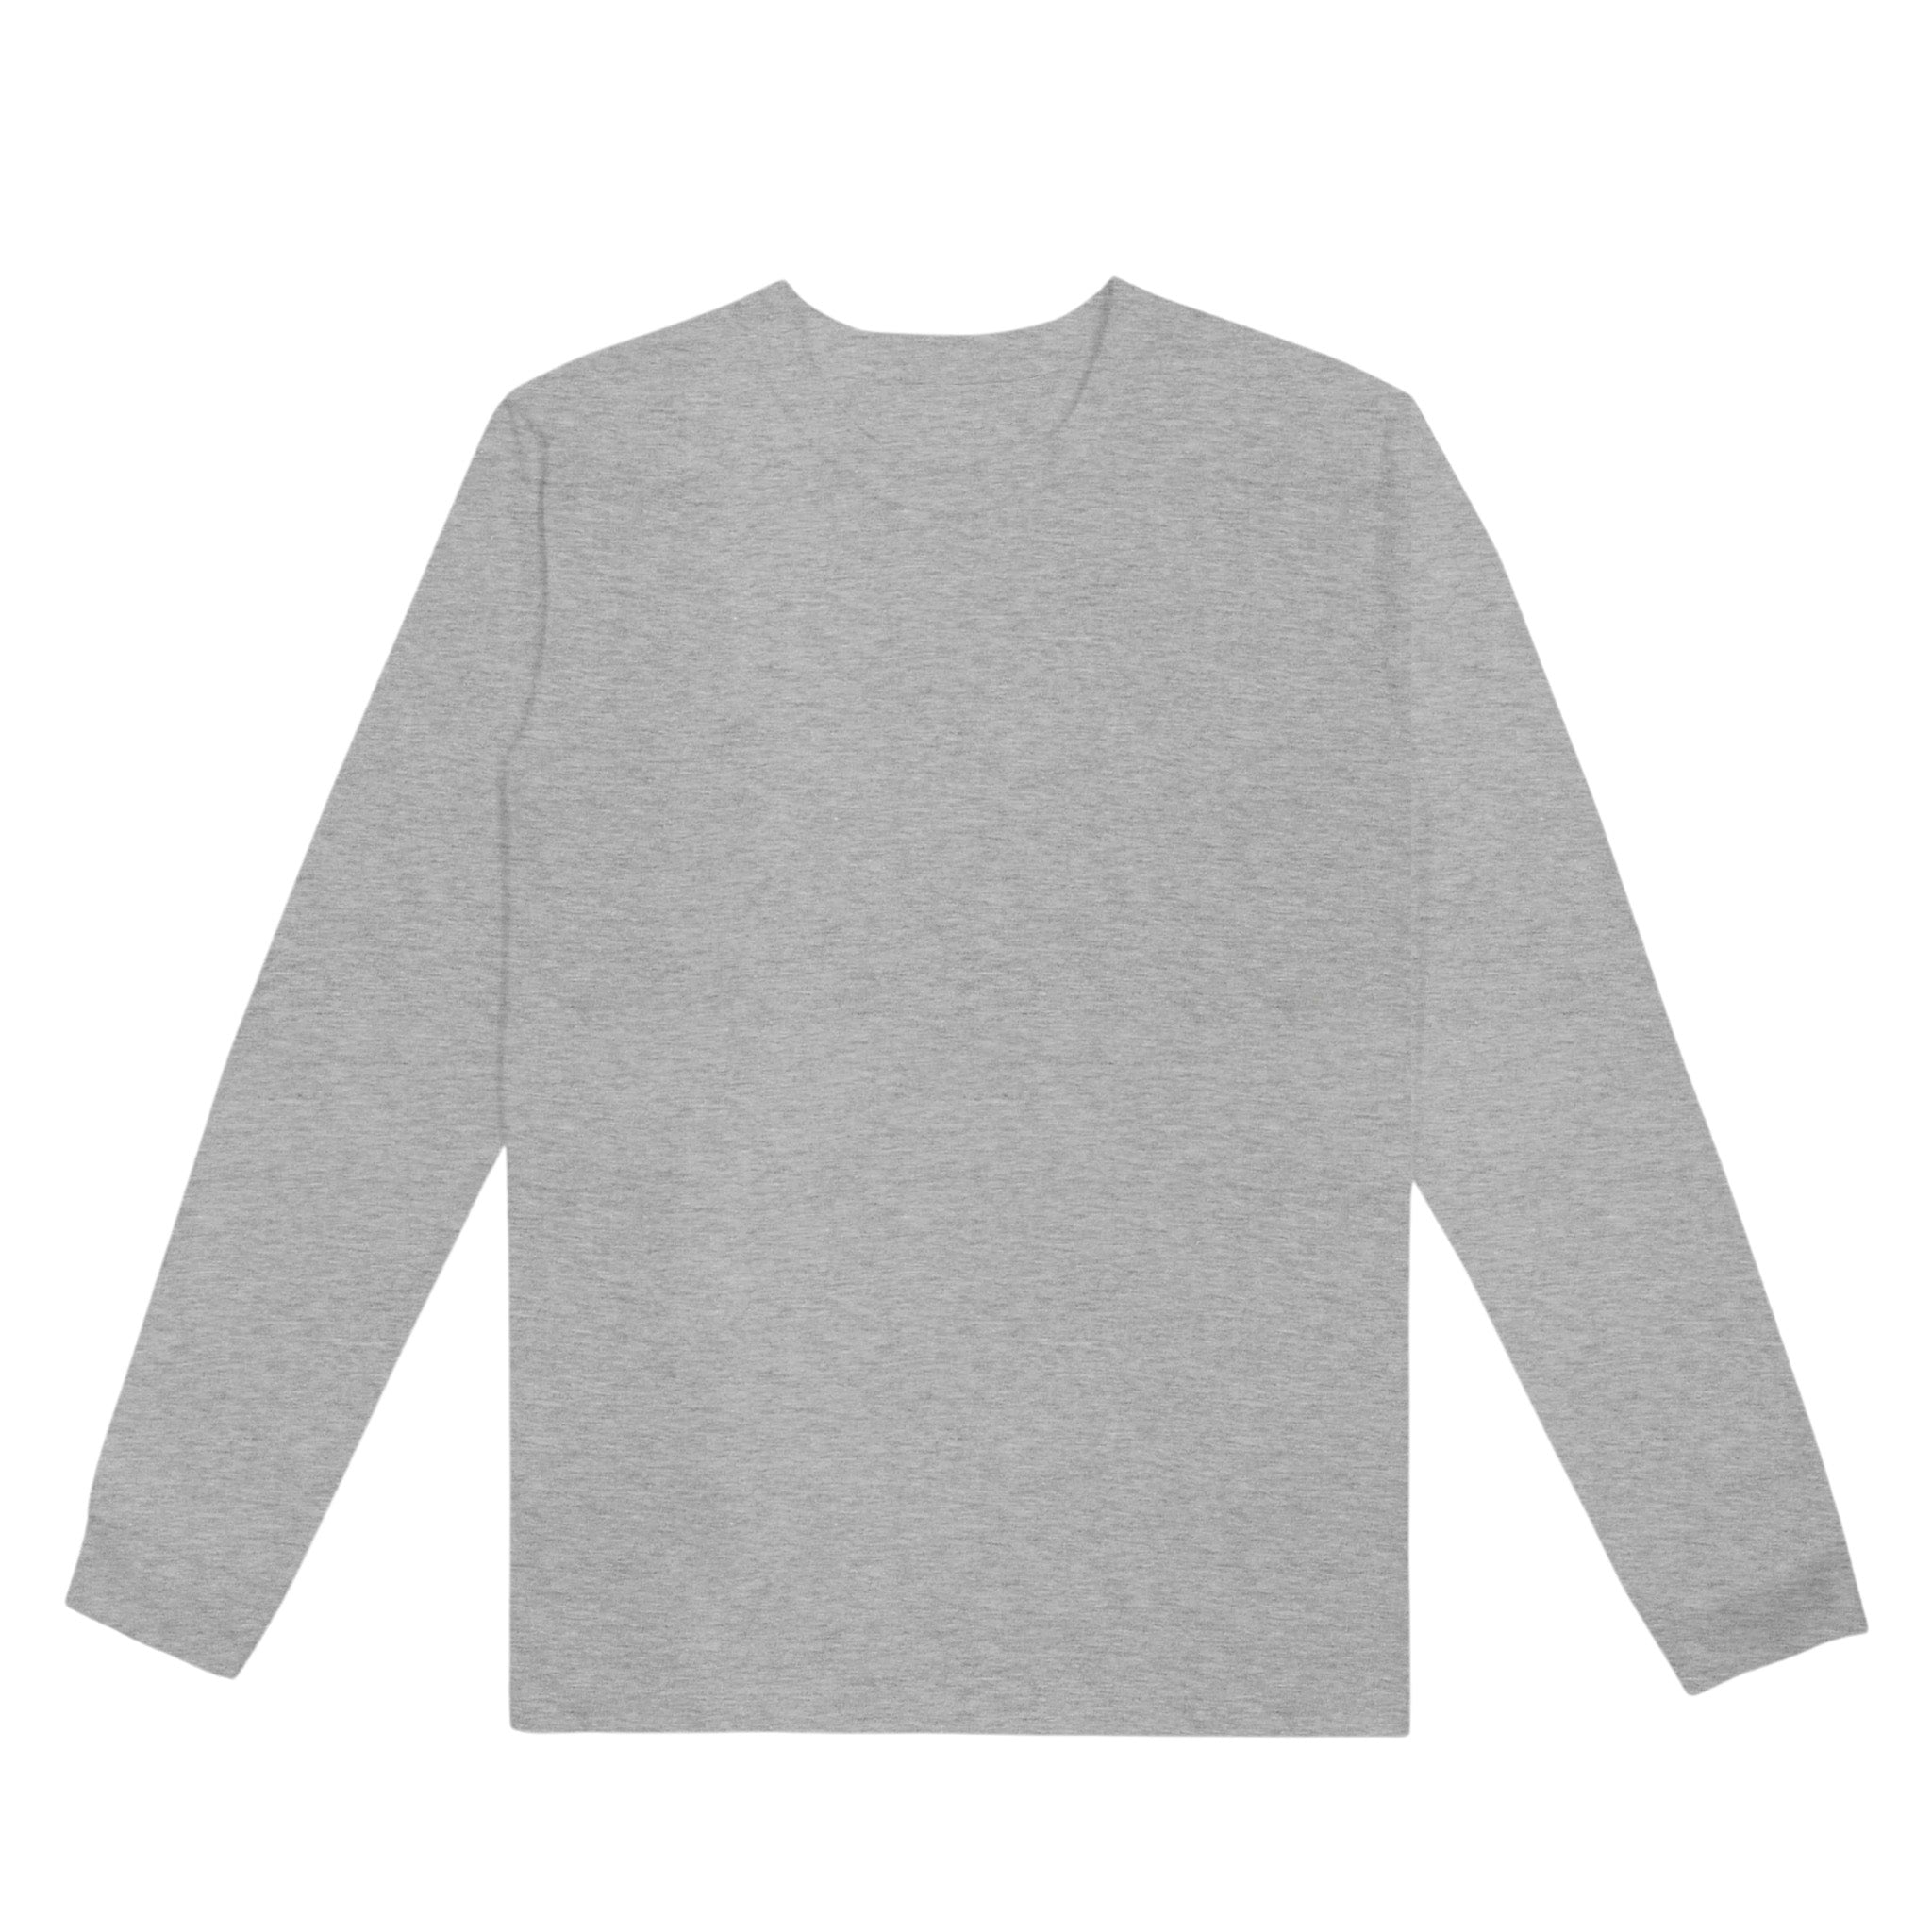 front view of grey long sleeve tee, front center on a white background.